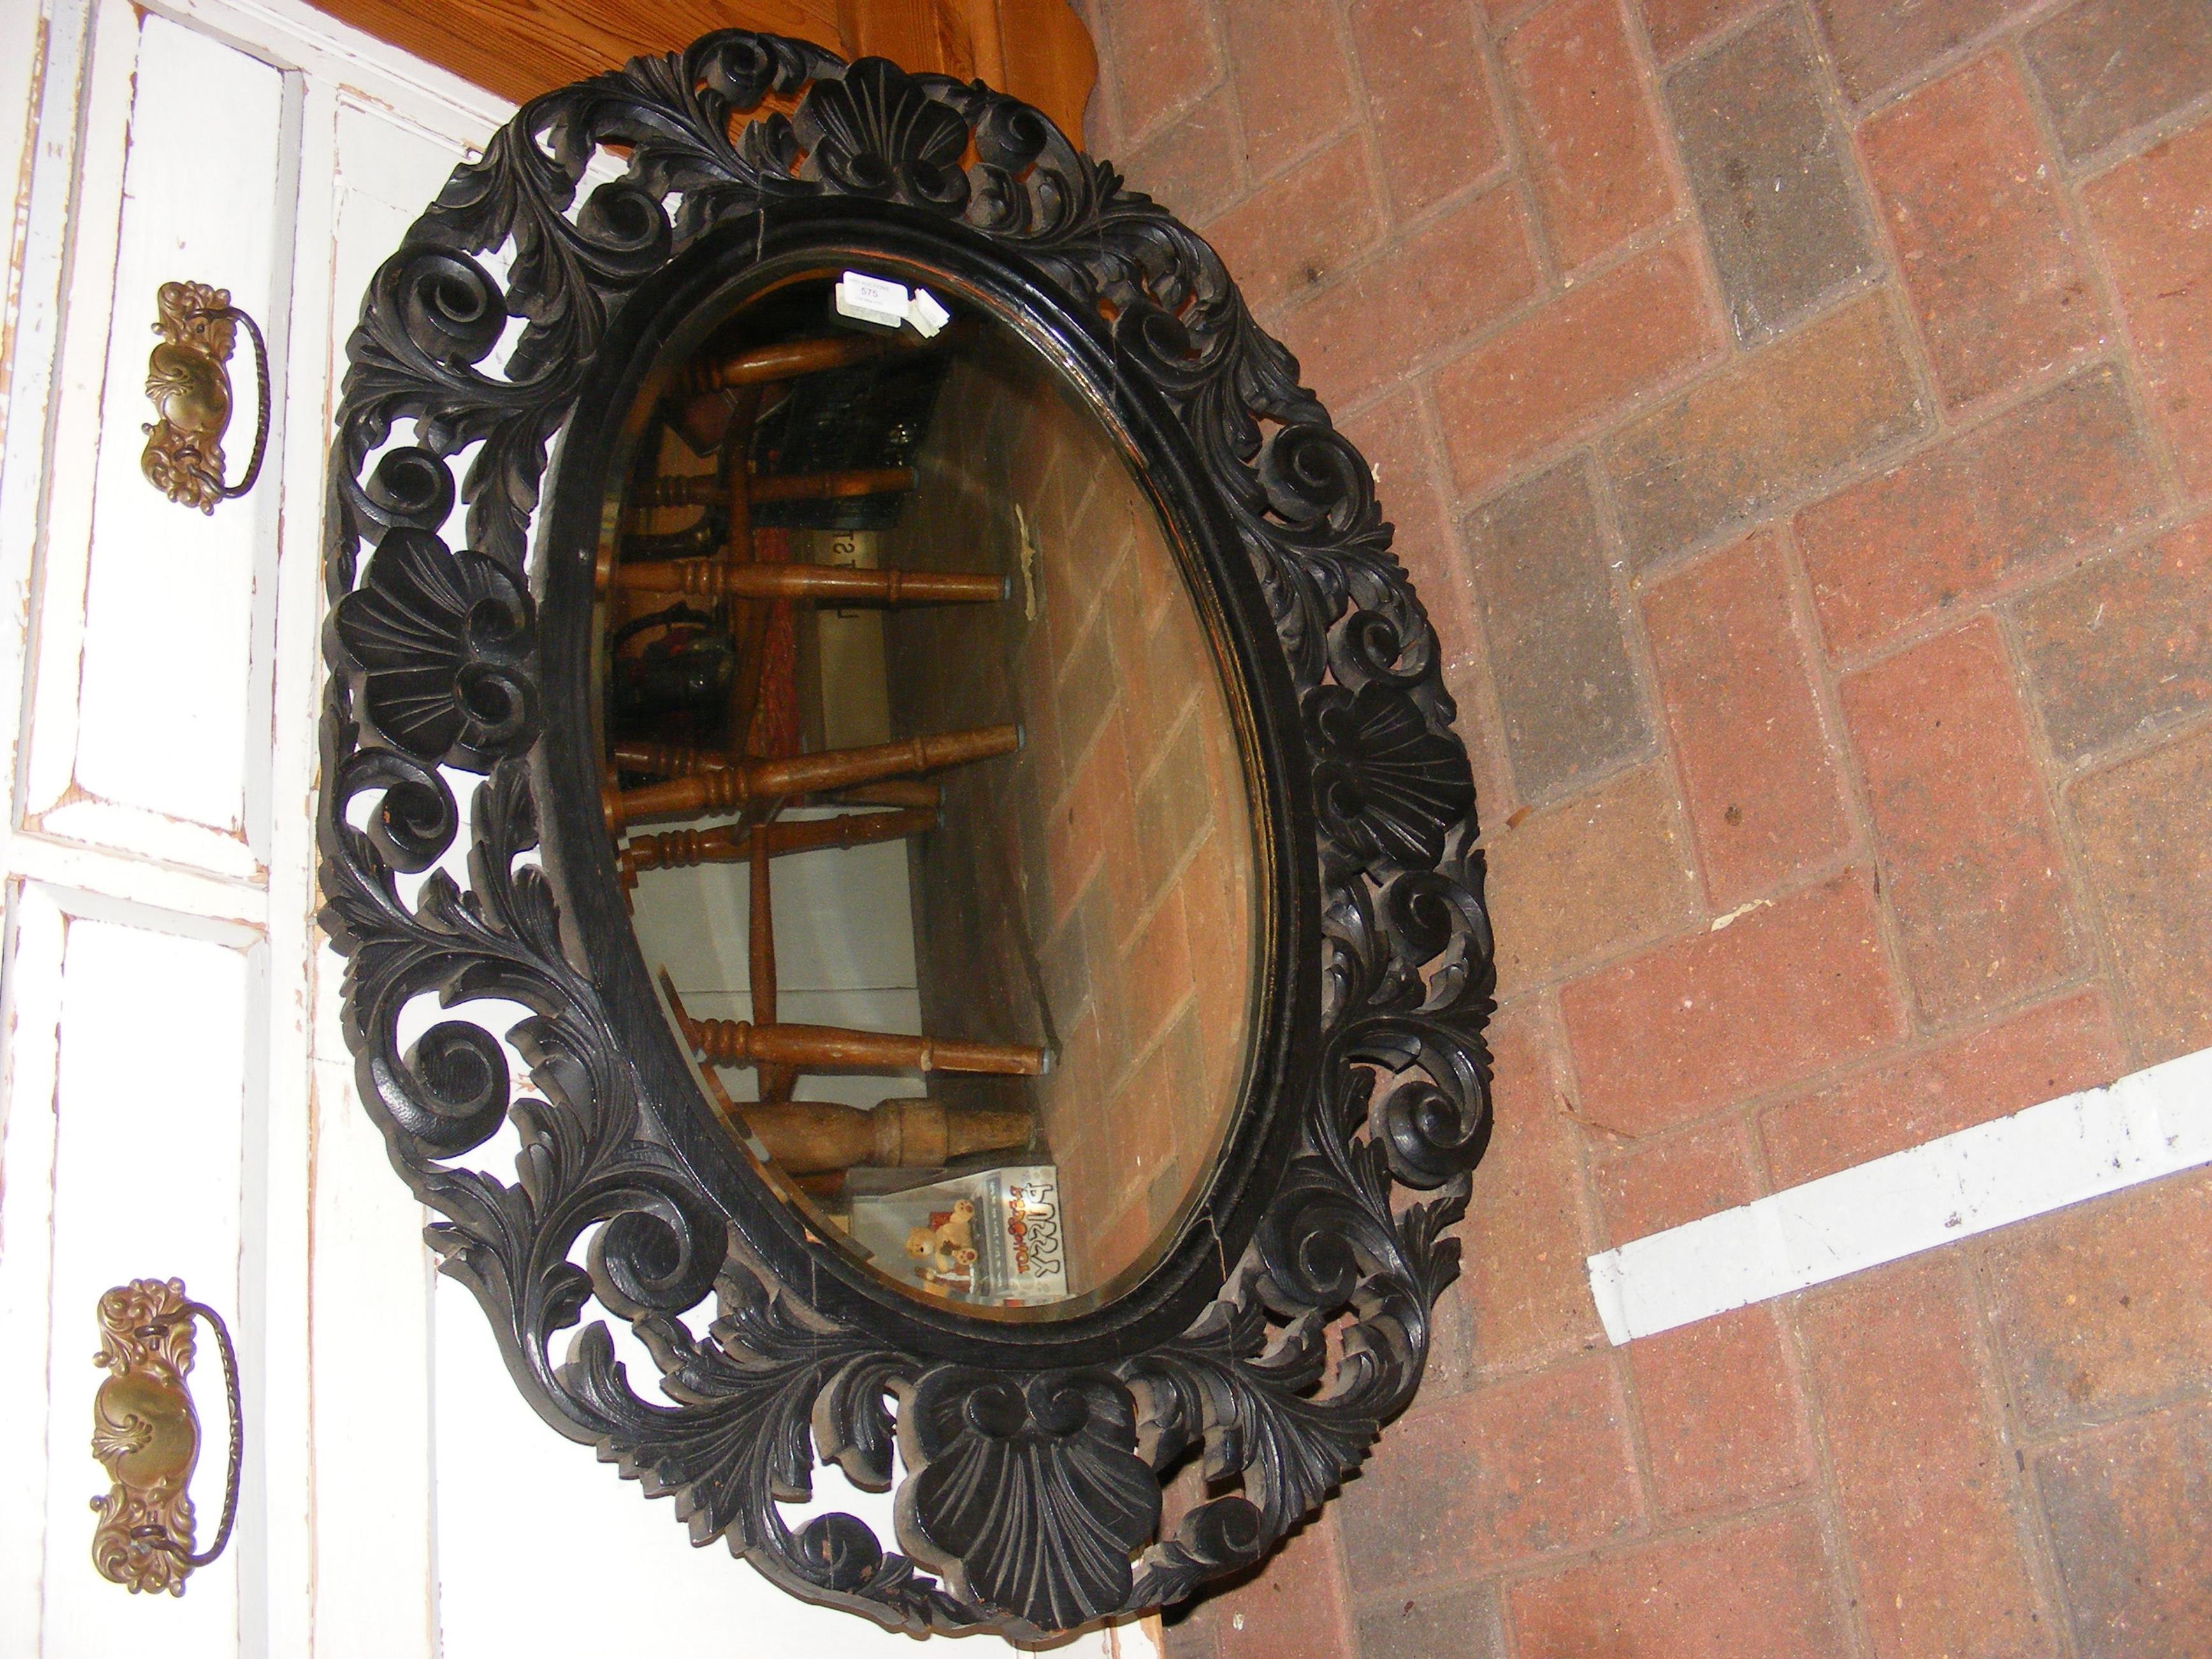 A bevelled oval mirror in ornate wooden surround